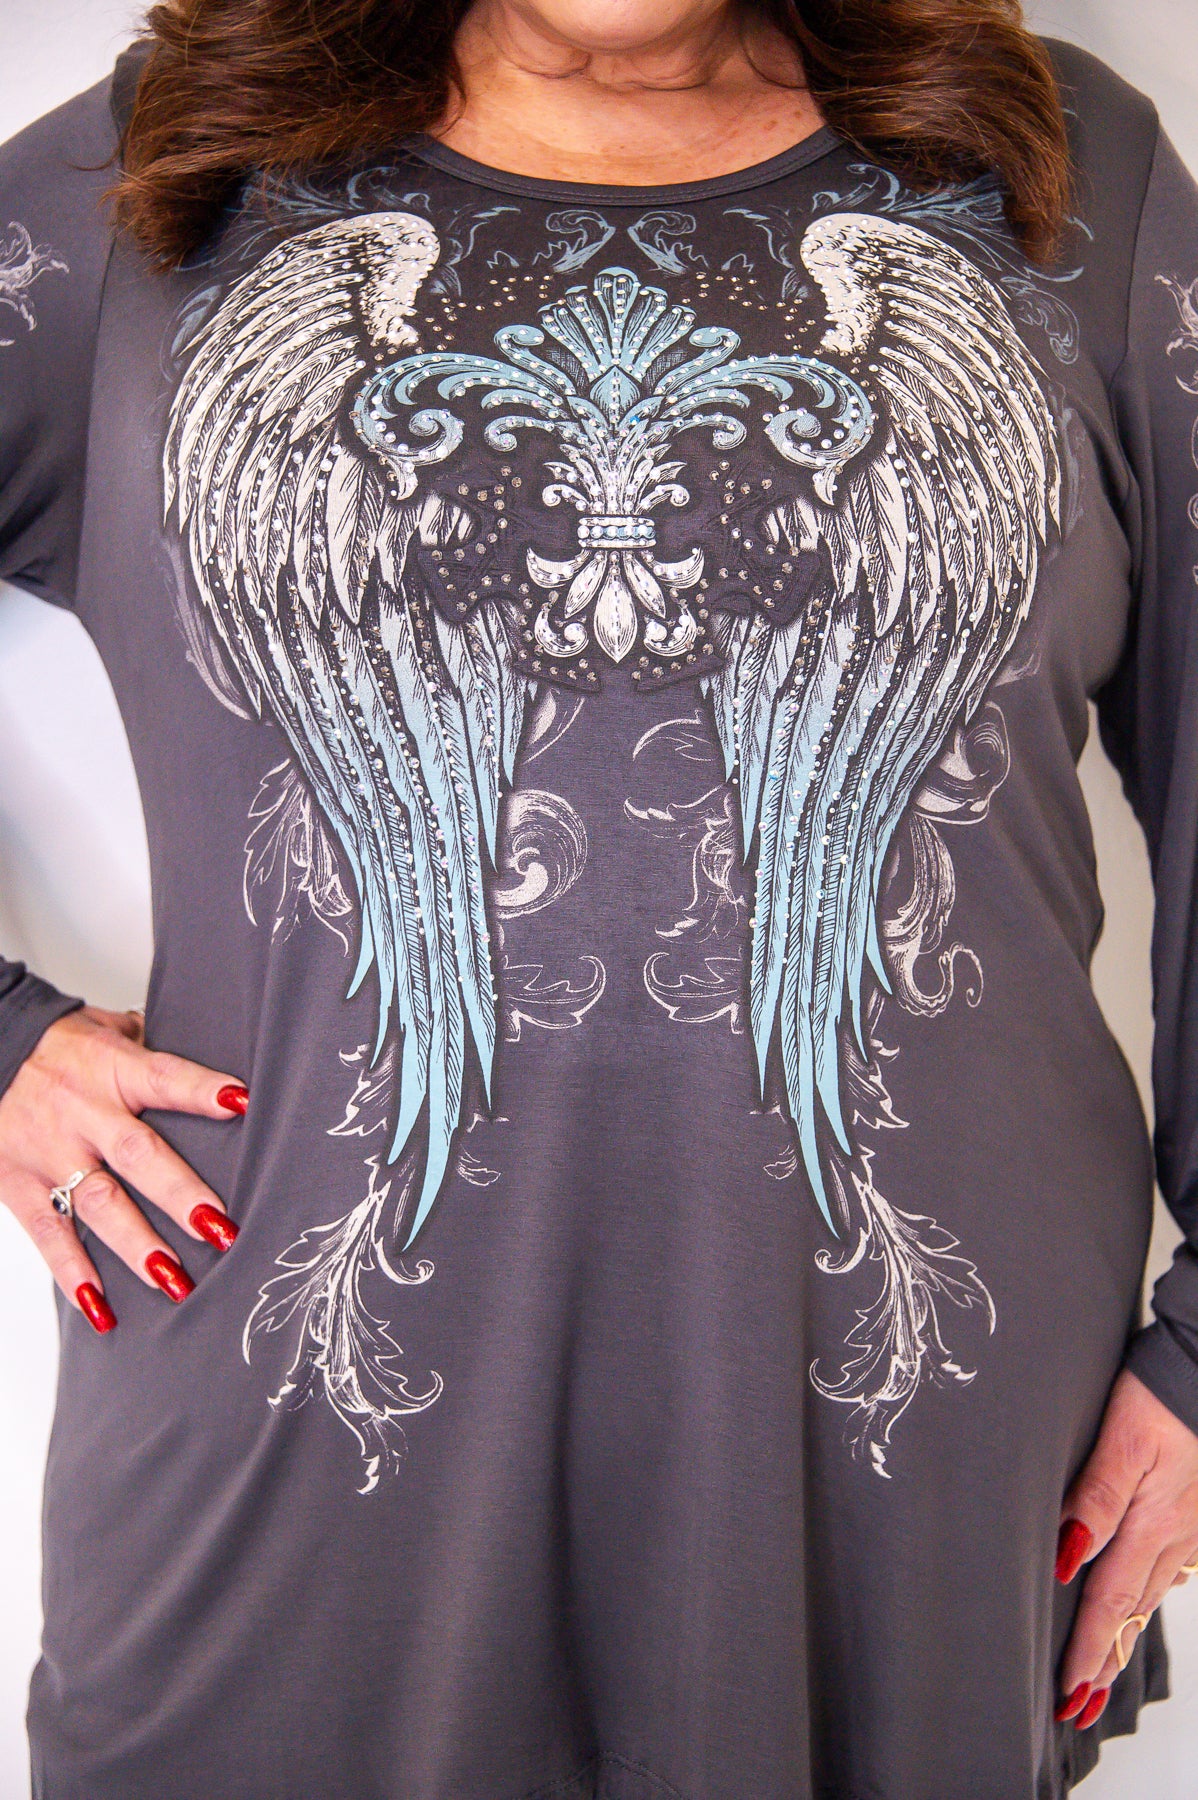 Spread Your Wings Charcoal/Light Blue Bling Angel Wings Top - T8741CH